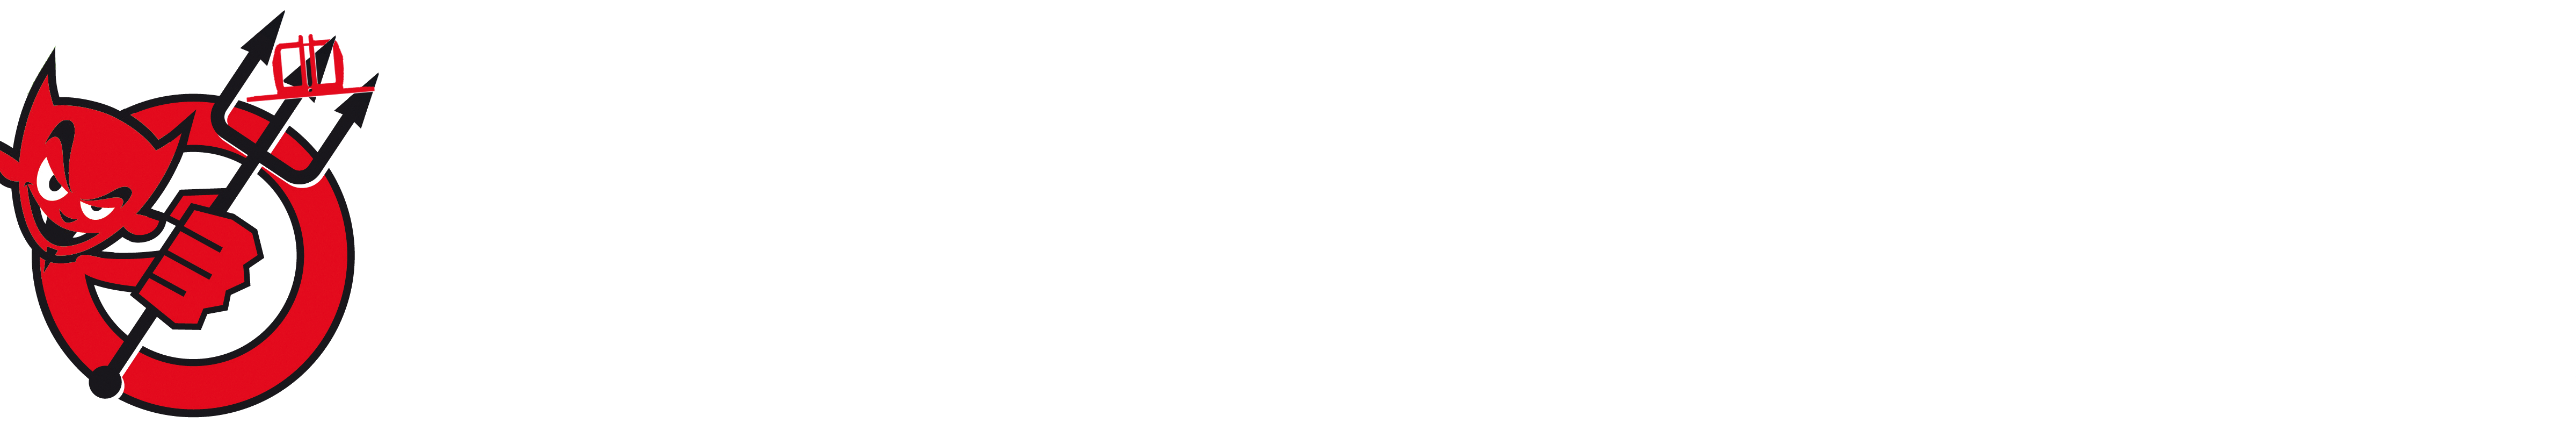 Stop Defeating